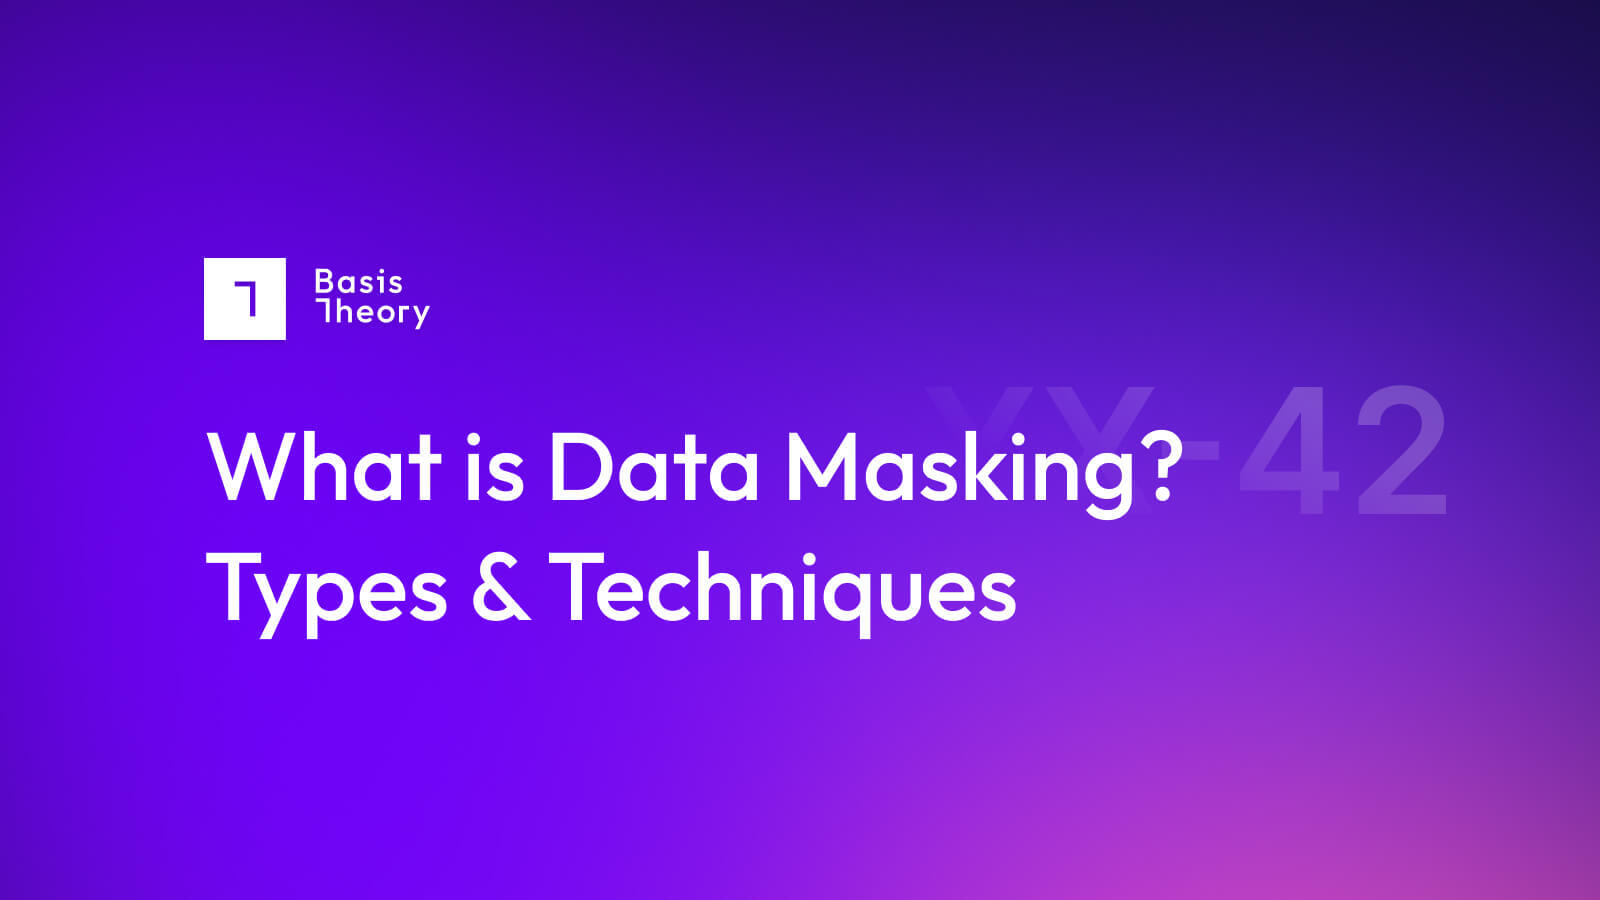 Data masking types and techniques